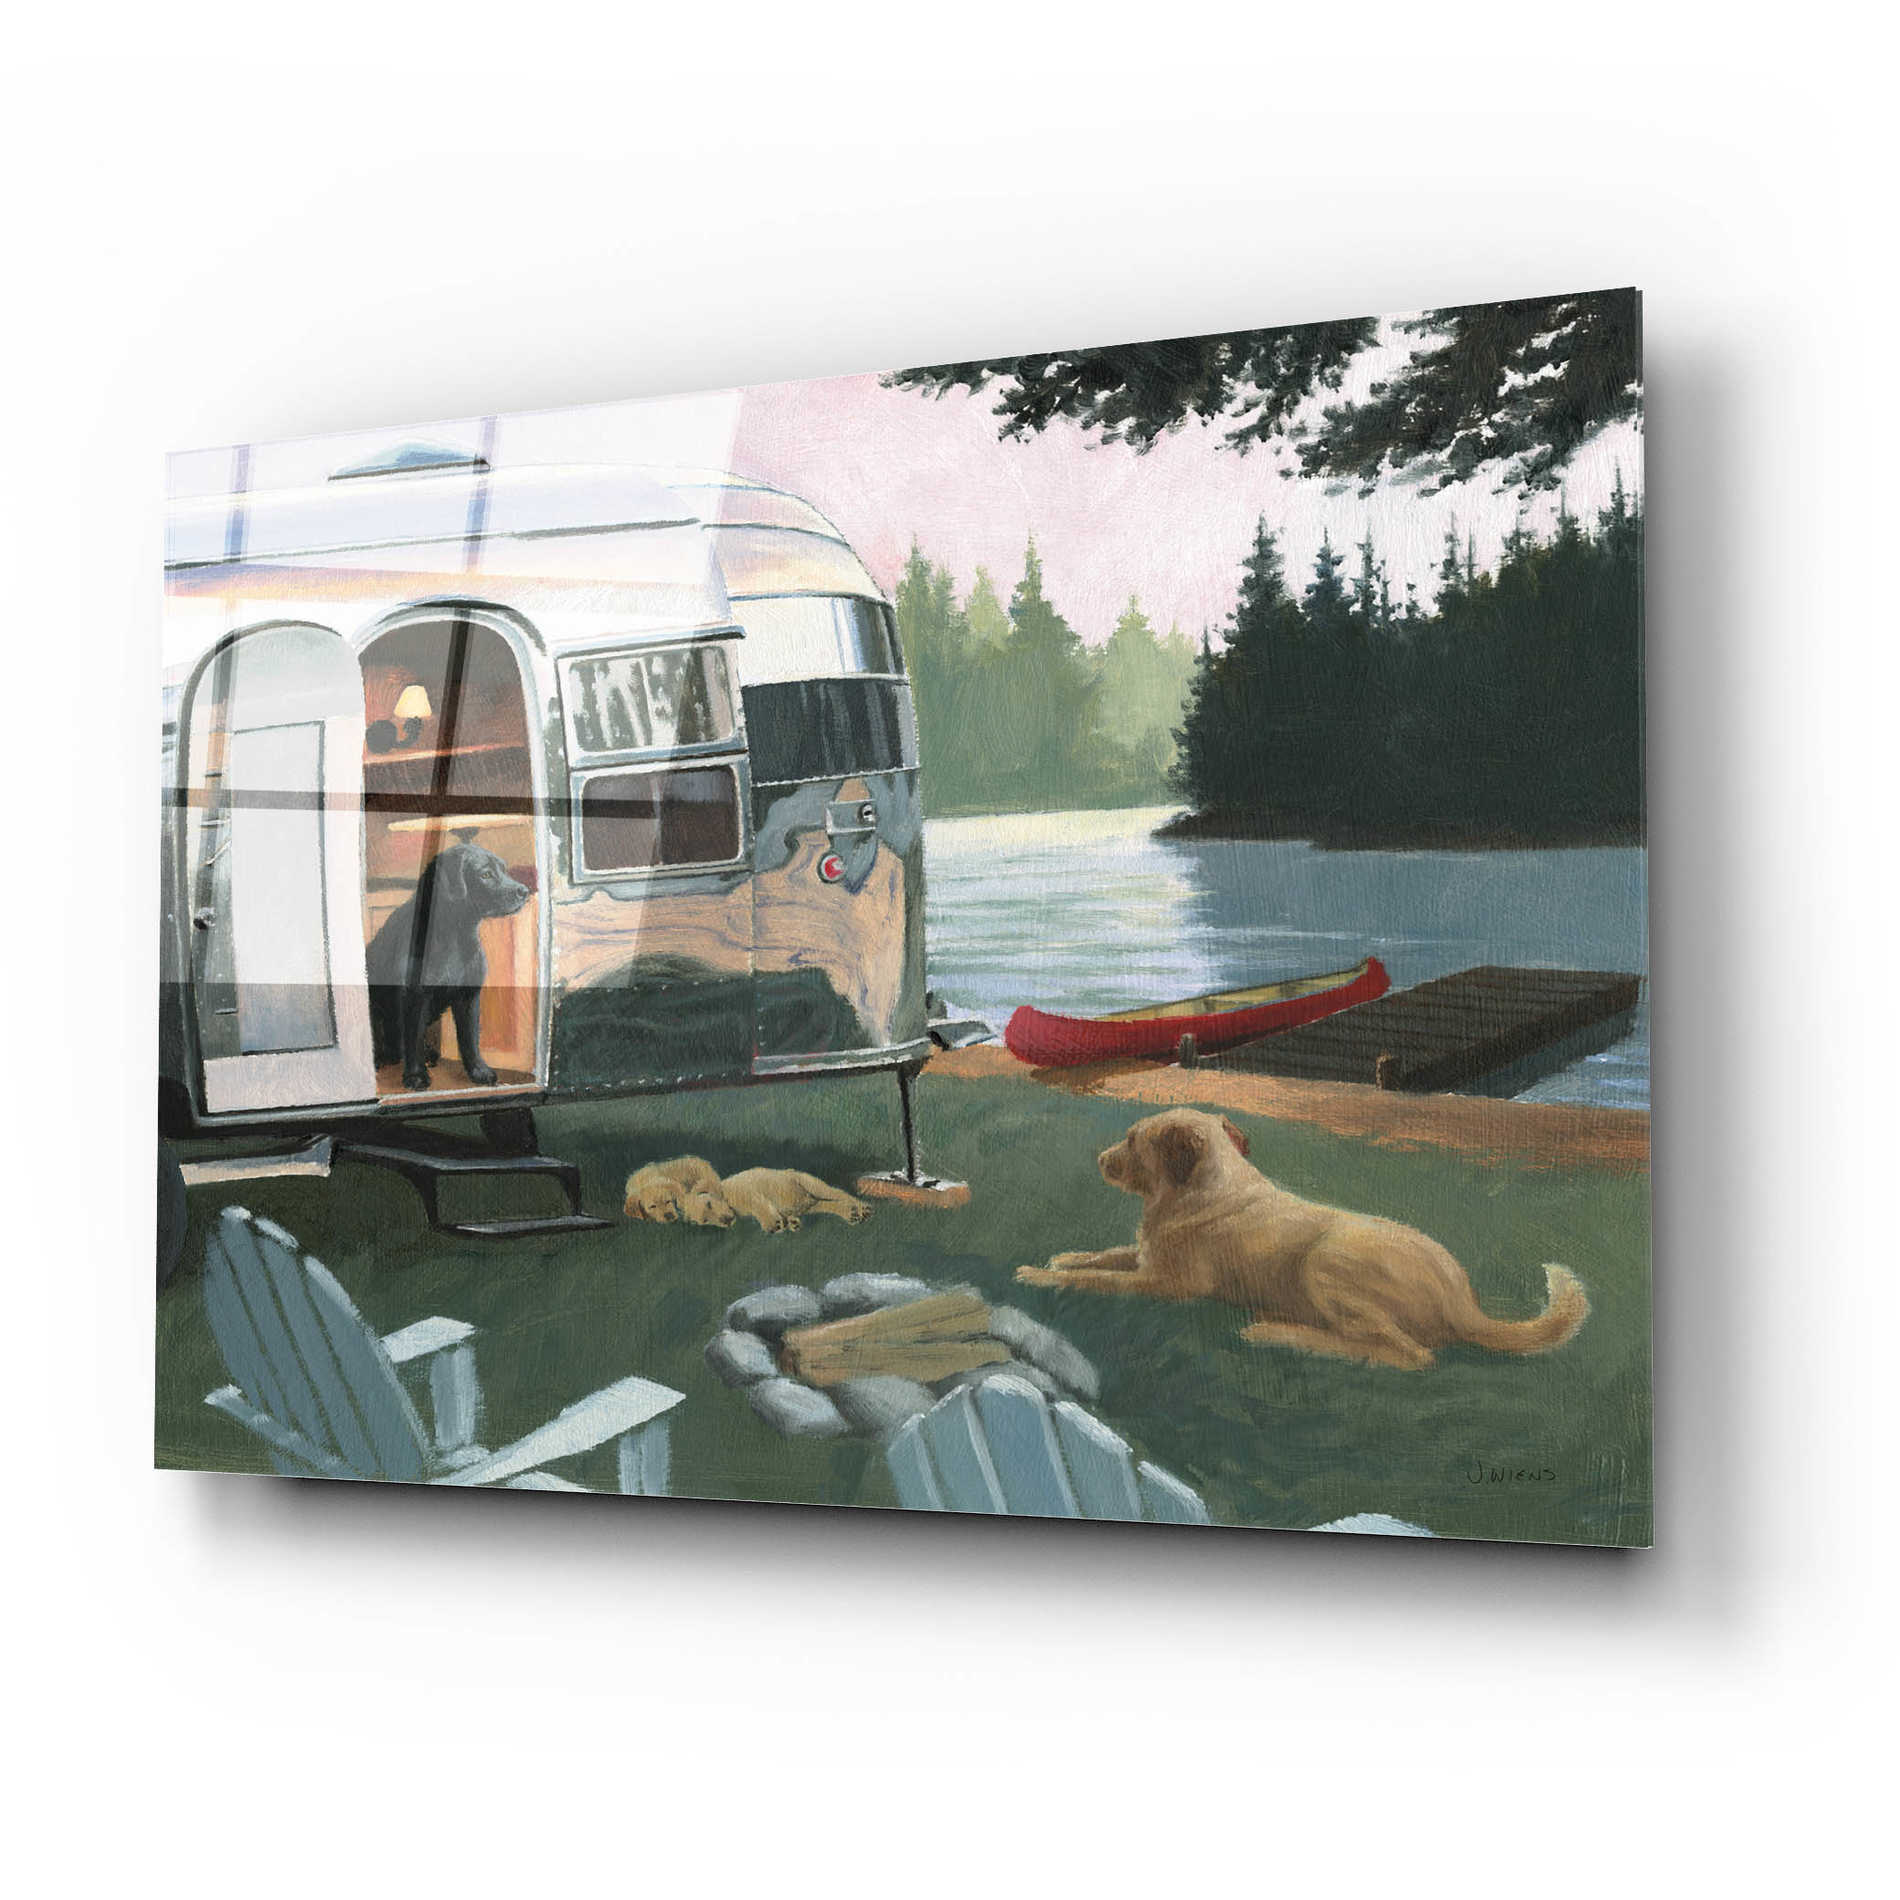 Epic Art 'Canine Camp' by James Wiens, Acrylic Glass Wall Art,24x16